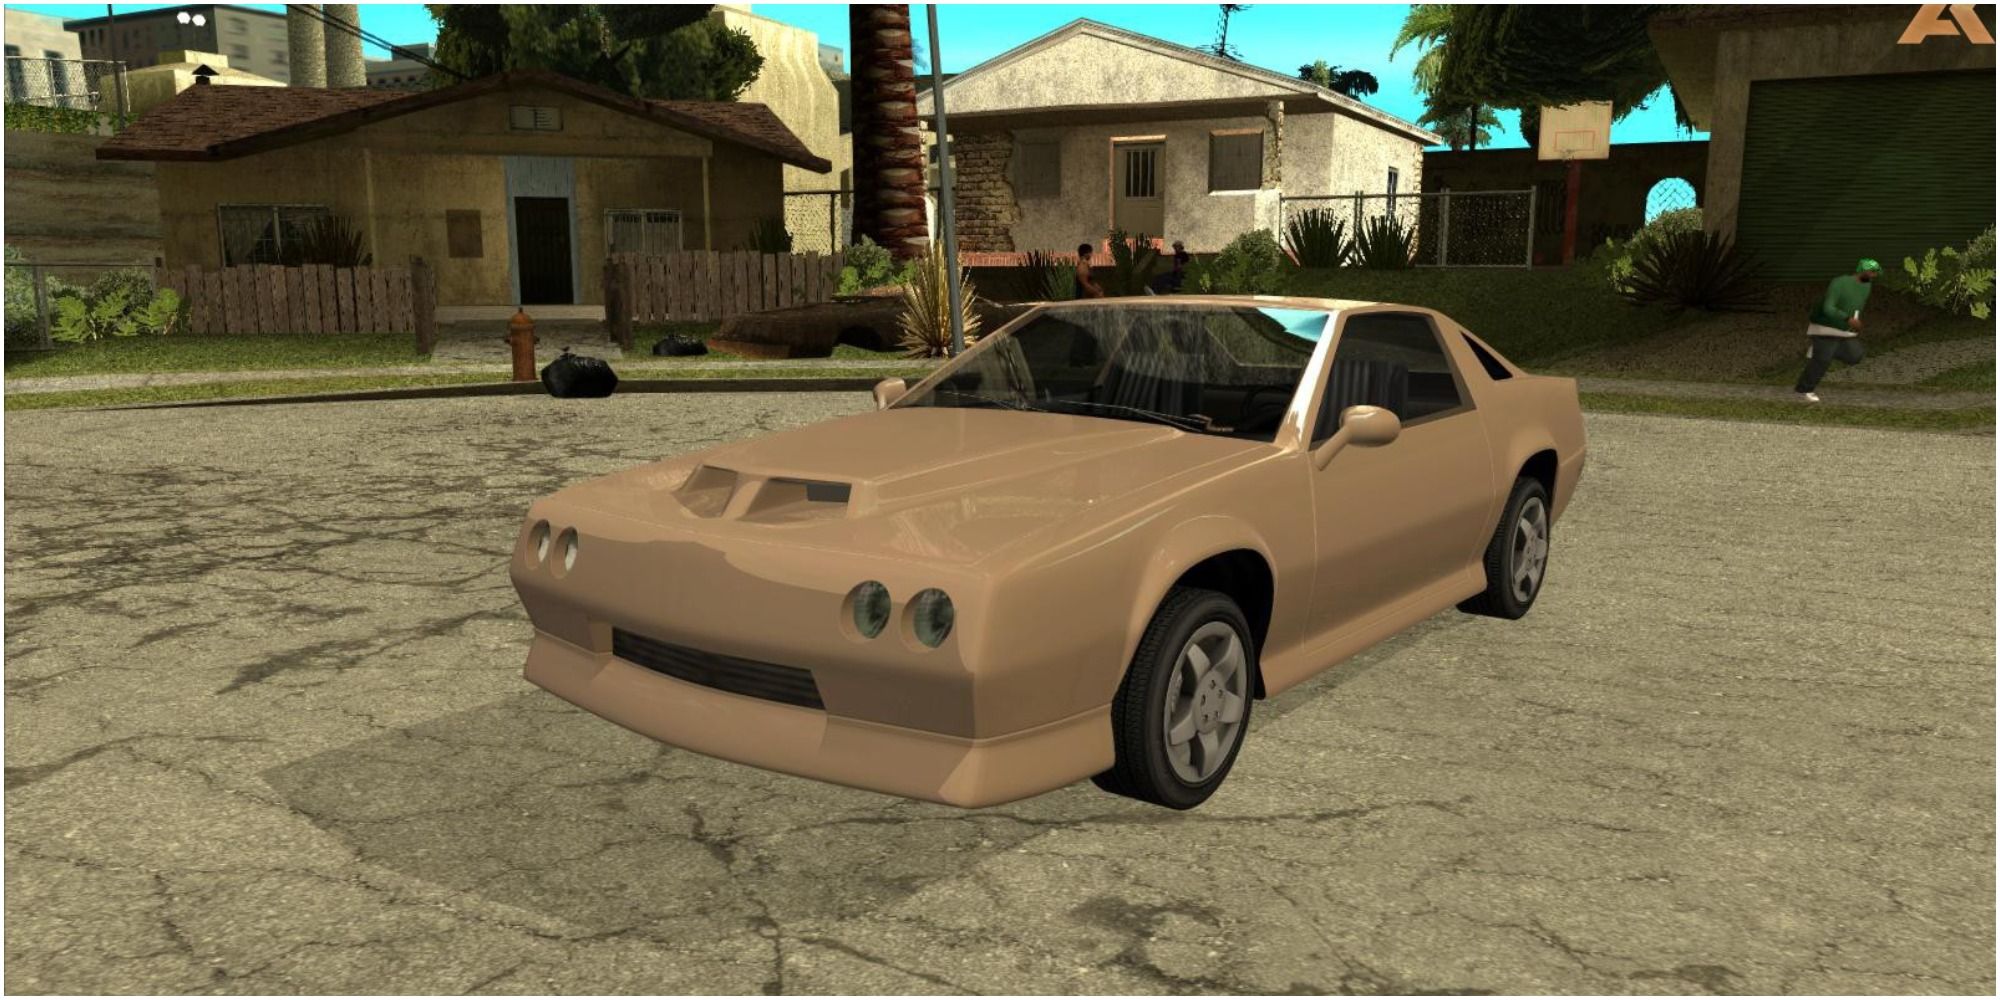 10 Fastest Cars In Grand Theft Auto: San Andreas, Ranked